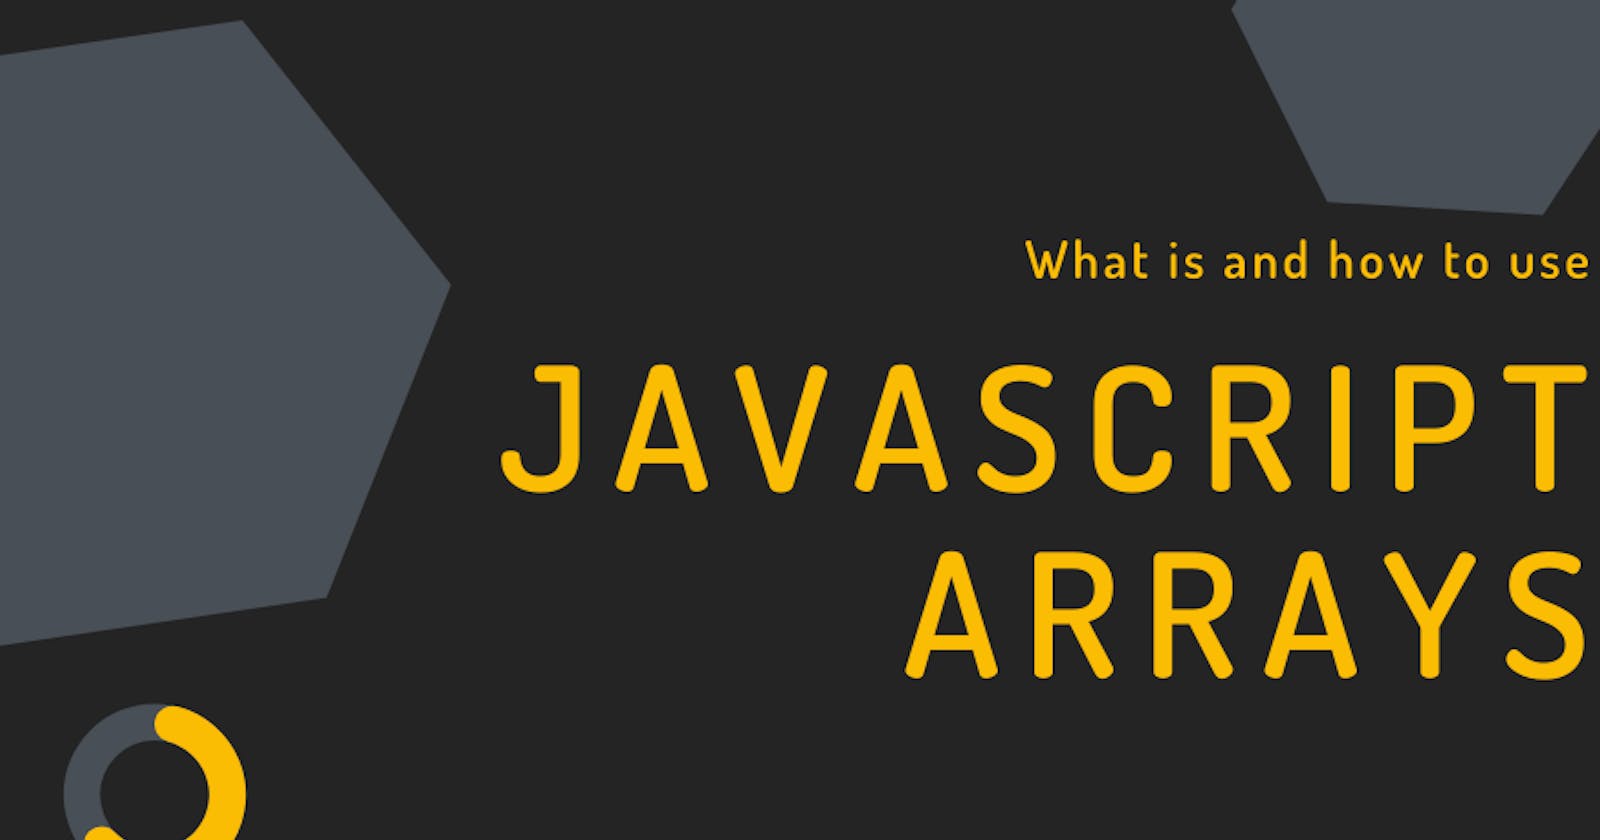 What is and how to use Javascript Arrays!